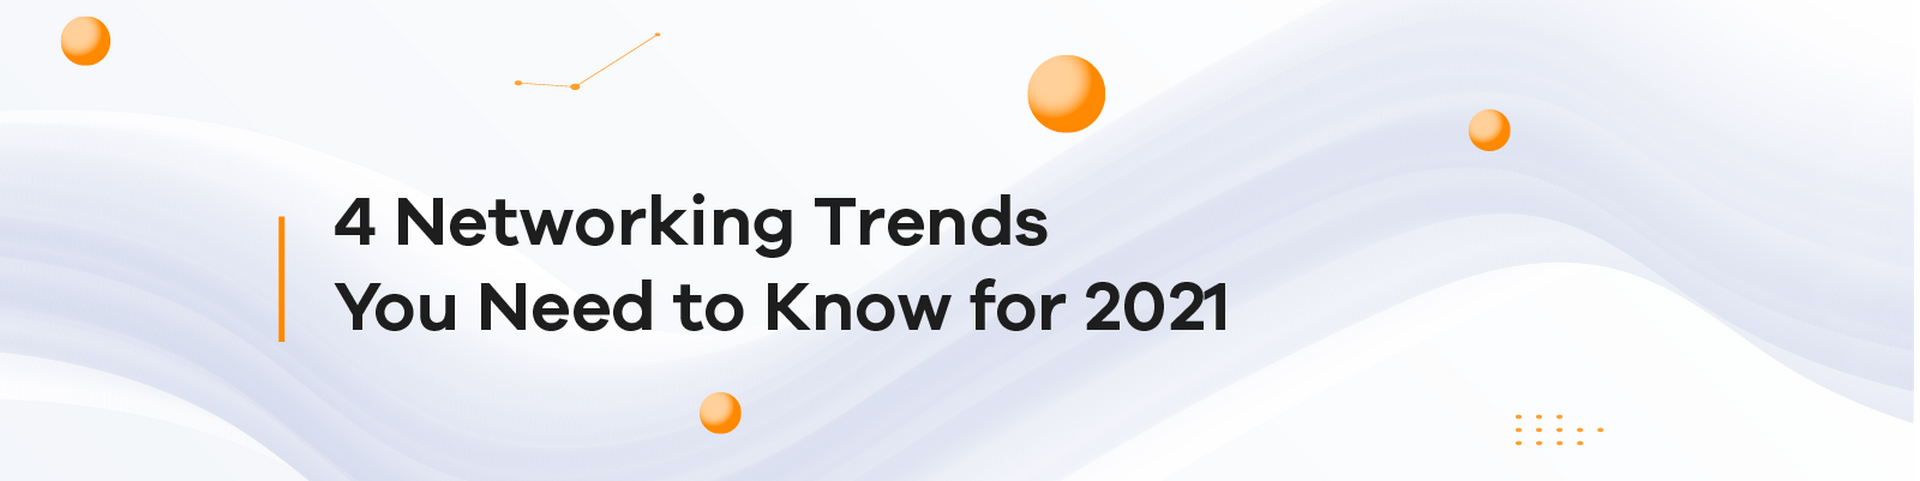 4 Networking Trends You Need to Know for 2021